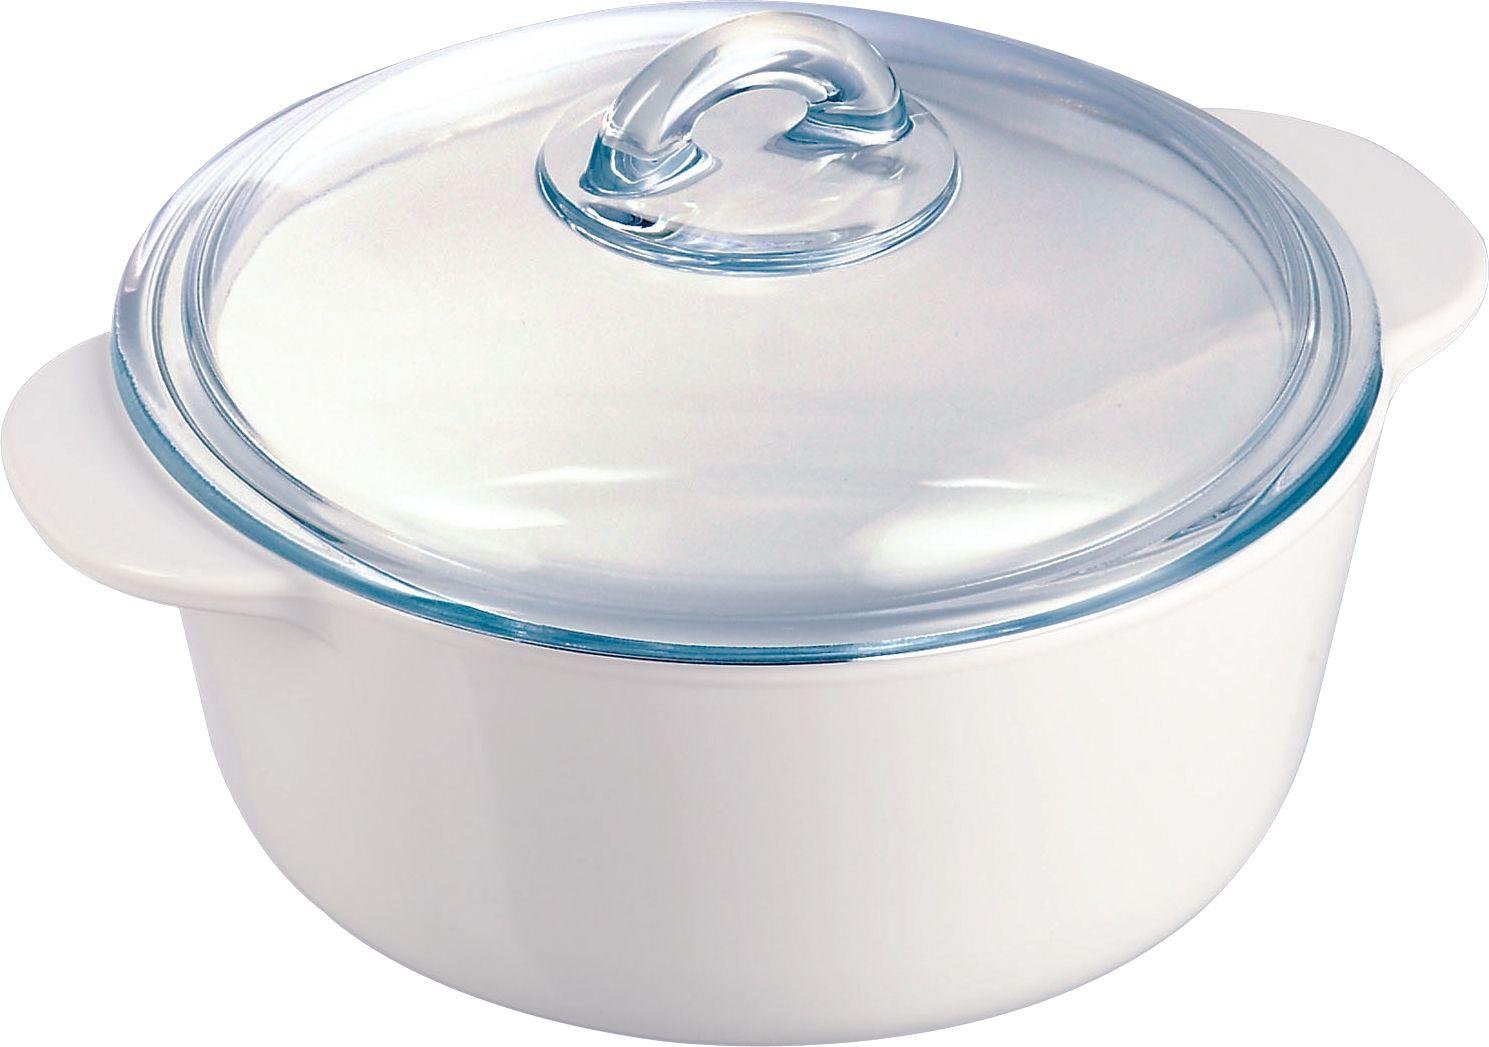 Pyrex Pyroflam 2 Litres Round Glass Casserole Dish